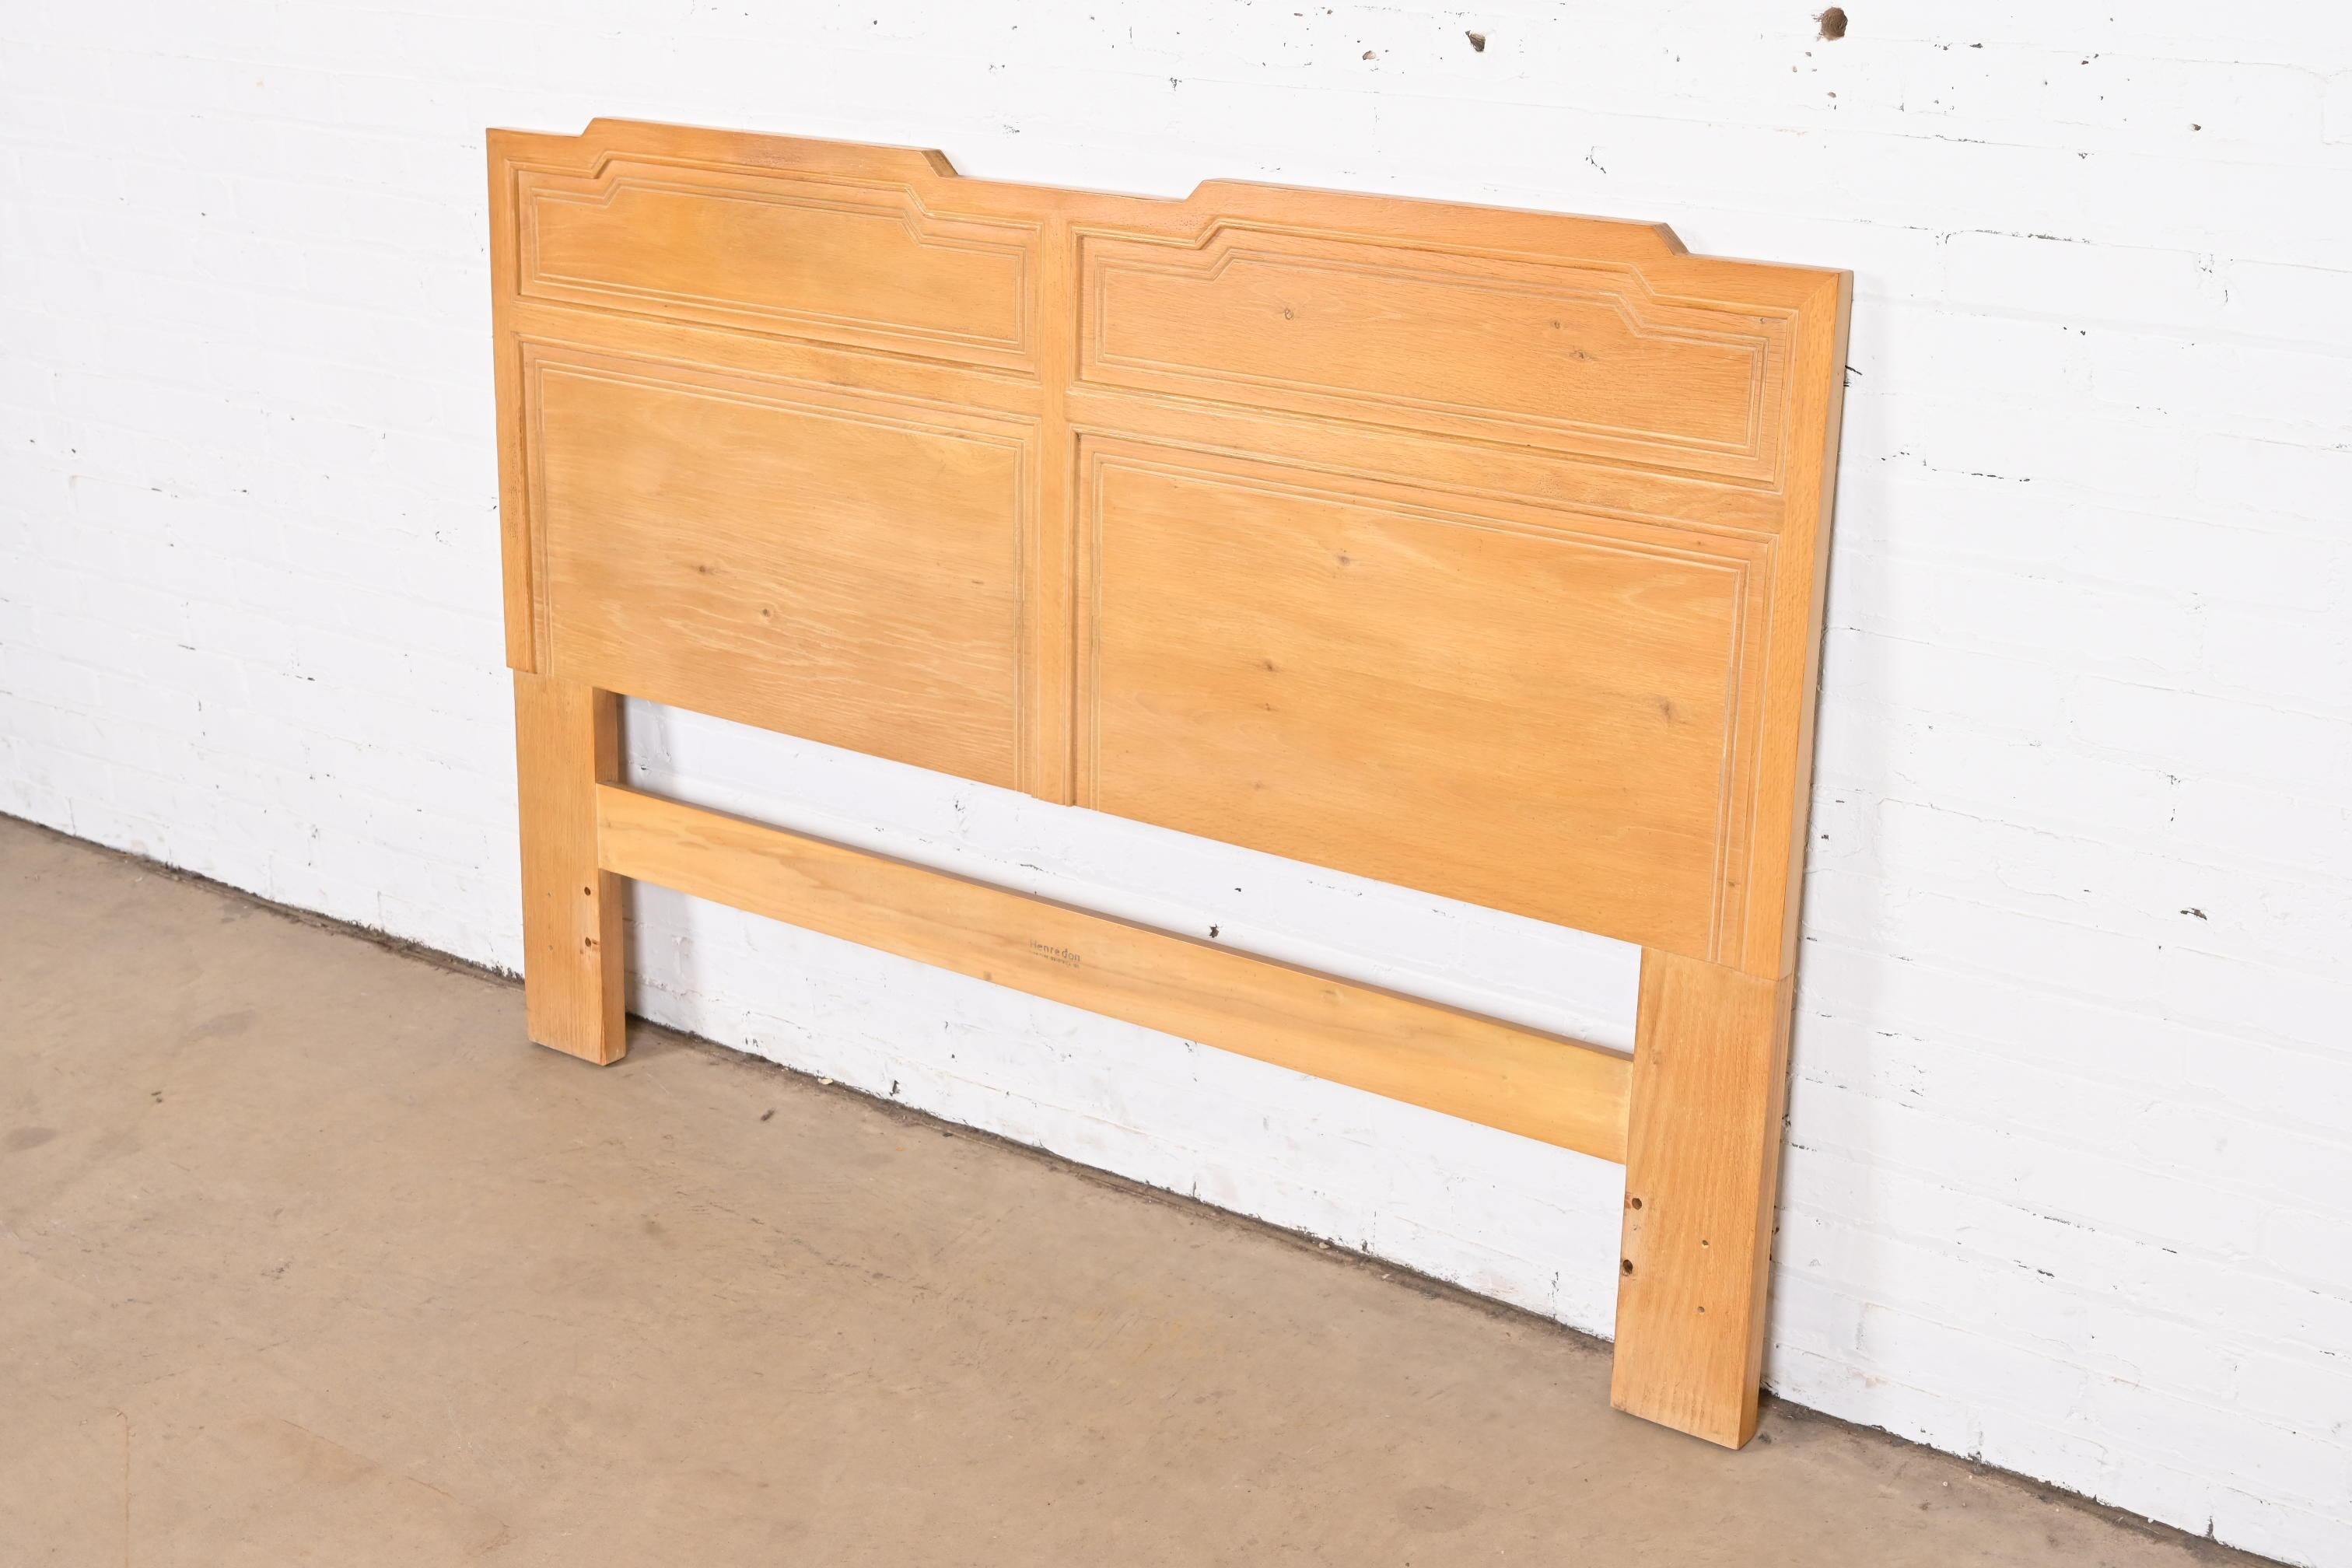 Henredon Mid-Century Modern Sculpted Ash Queen Size Headboard, circa 1970s In Good Condition For Sale In South Bend, IN